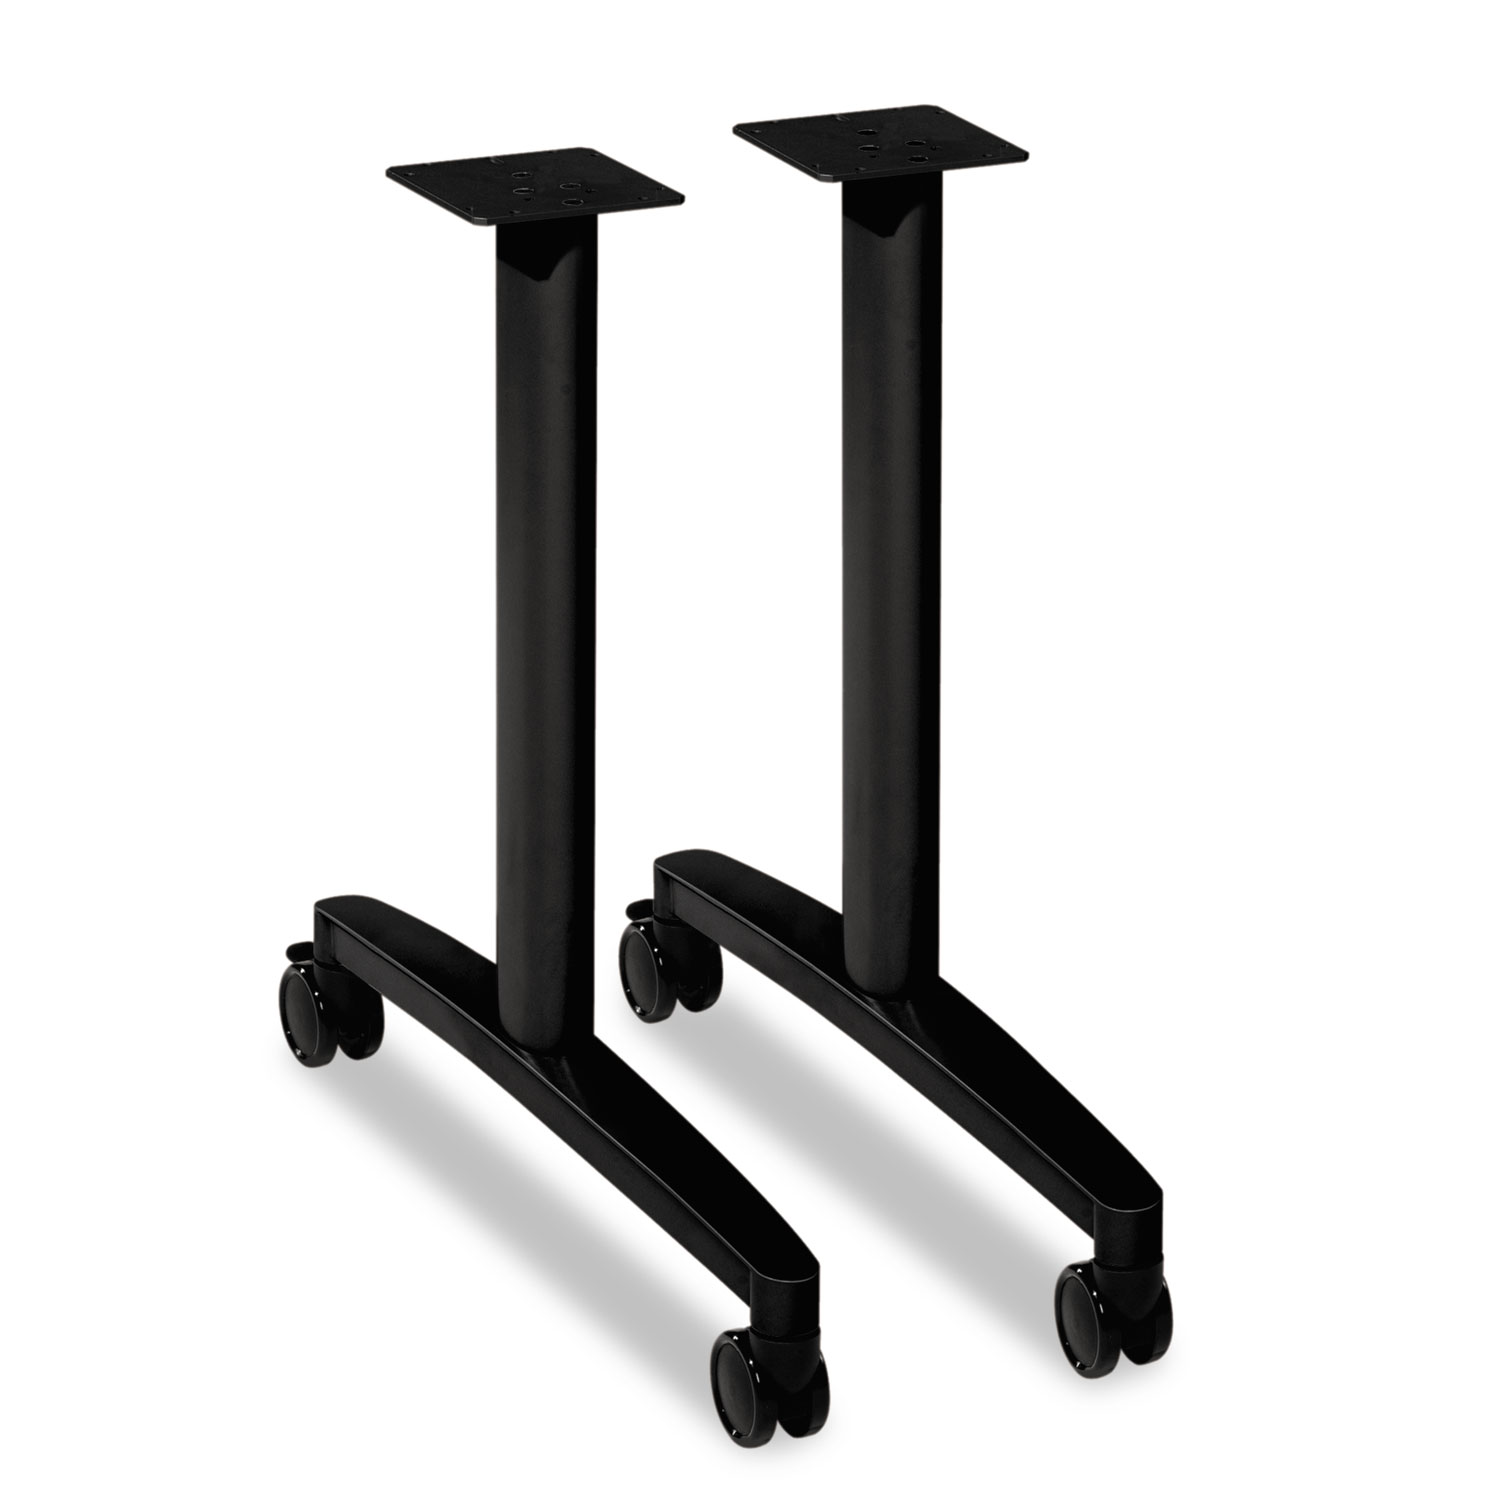 Huddle T-Leg Base for 24 and 30 Deep Table Tops, Black